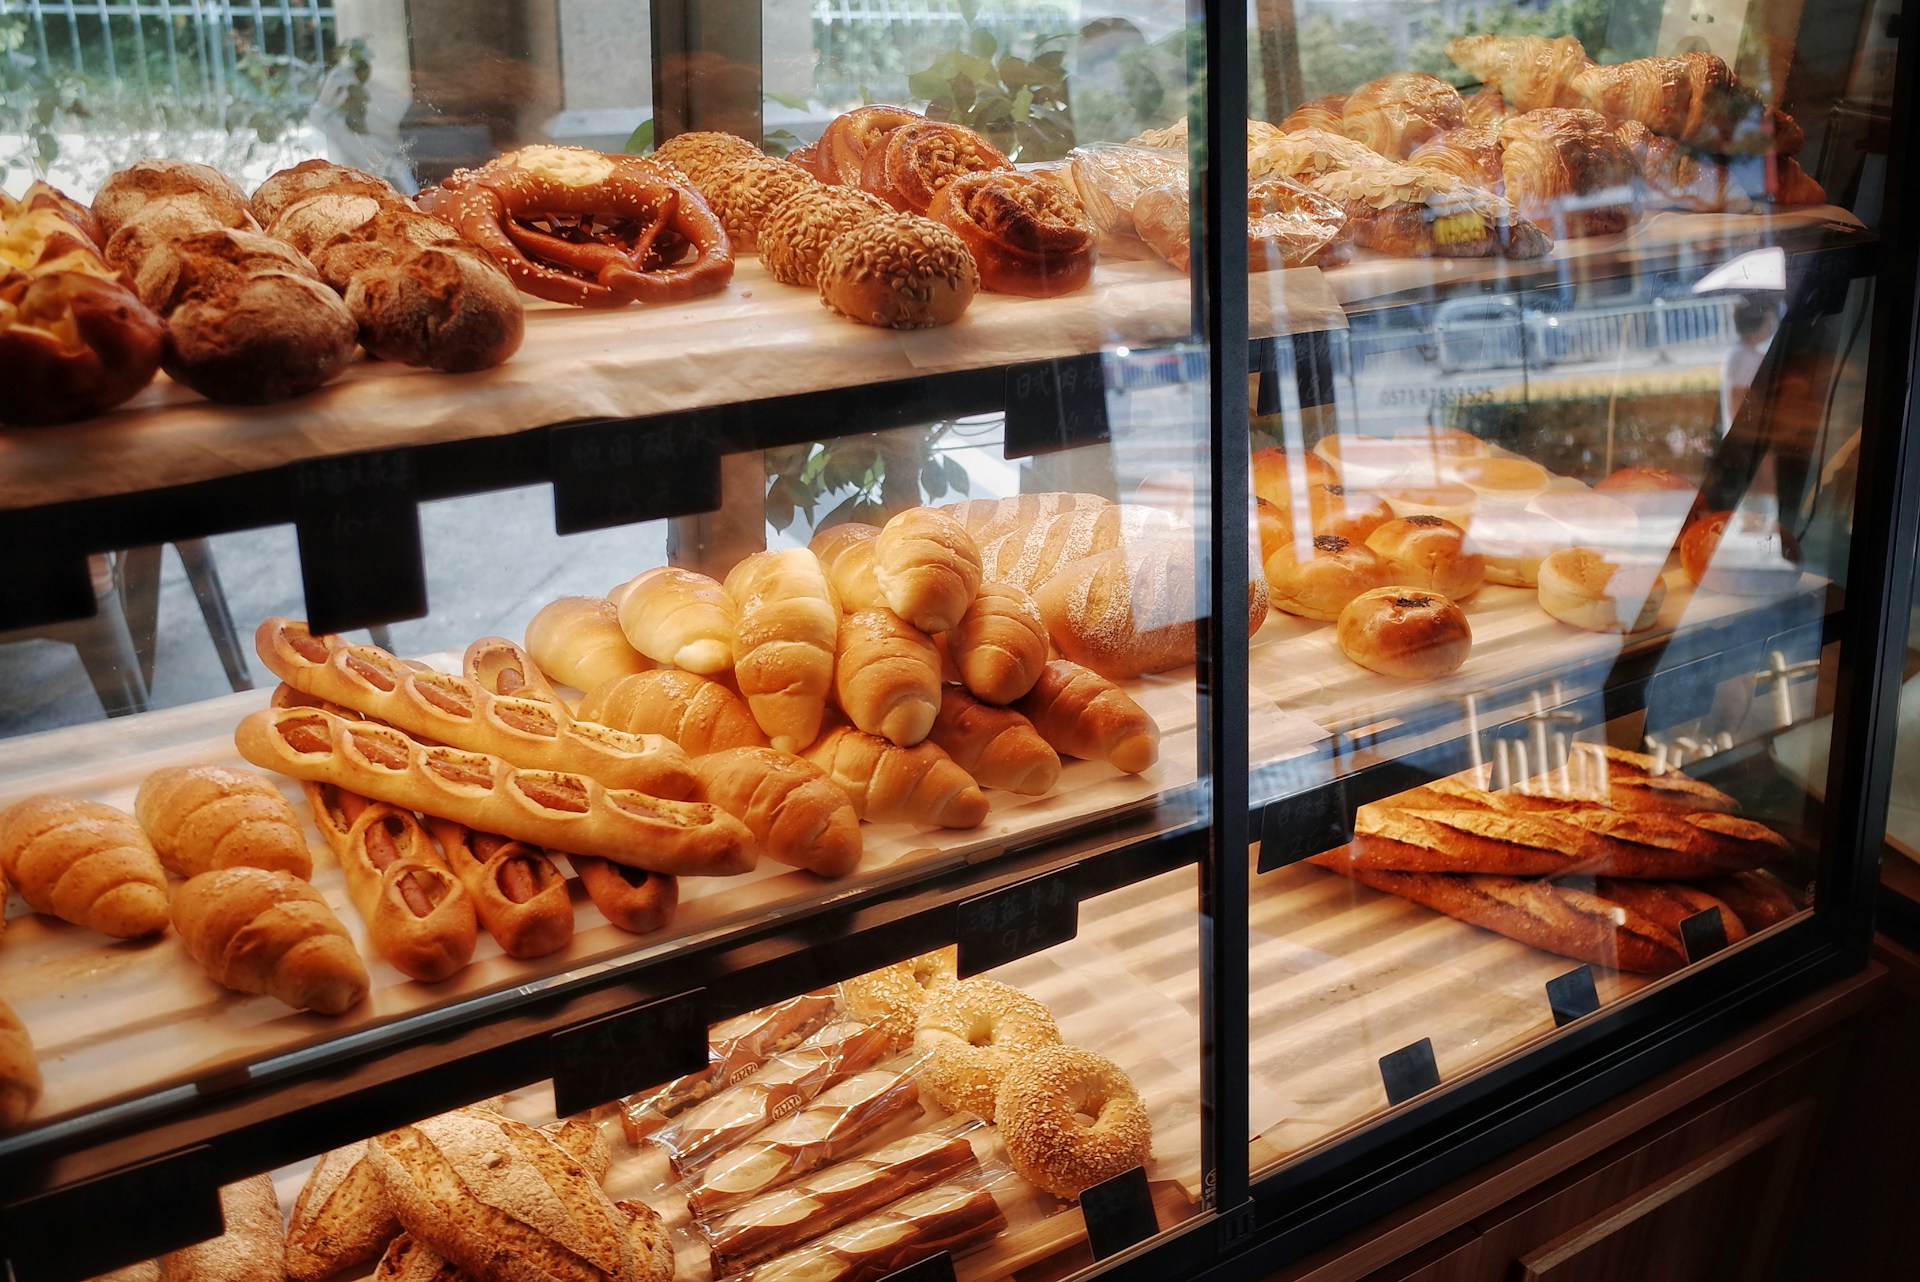 Glass case with breads